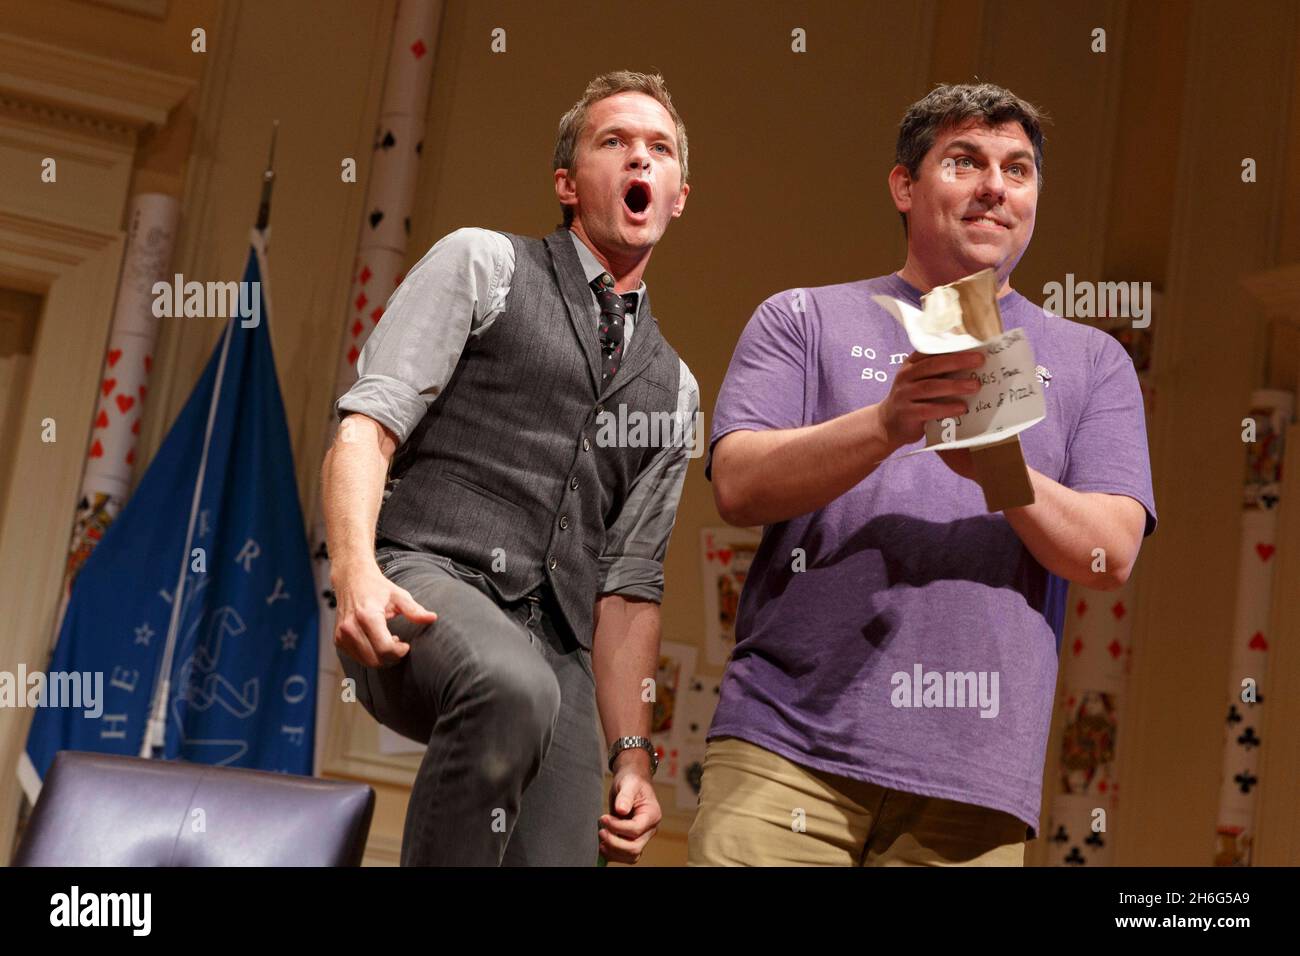 Washington, United States of America. 11 September, 2019. An audience member helps Neil Patrick Harris, left, finish his magic routine during the National Book Festival Presents series, September 11, 2019 in Washington, D.C.  Credit: Shawn Miller/Library of Congress/Alamy Live News Stock Photo